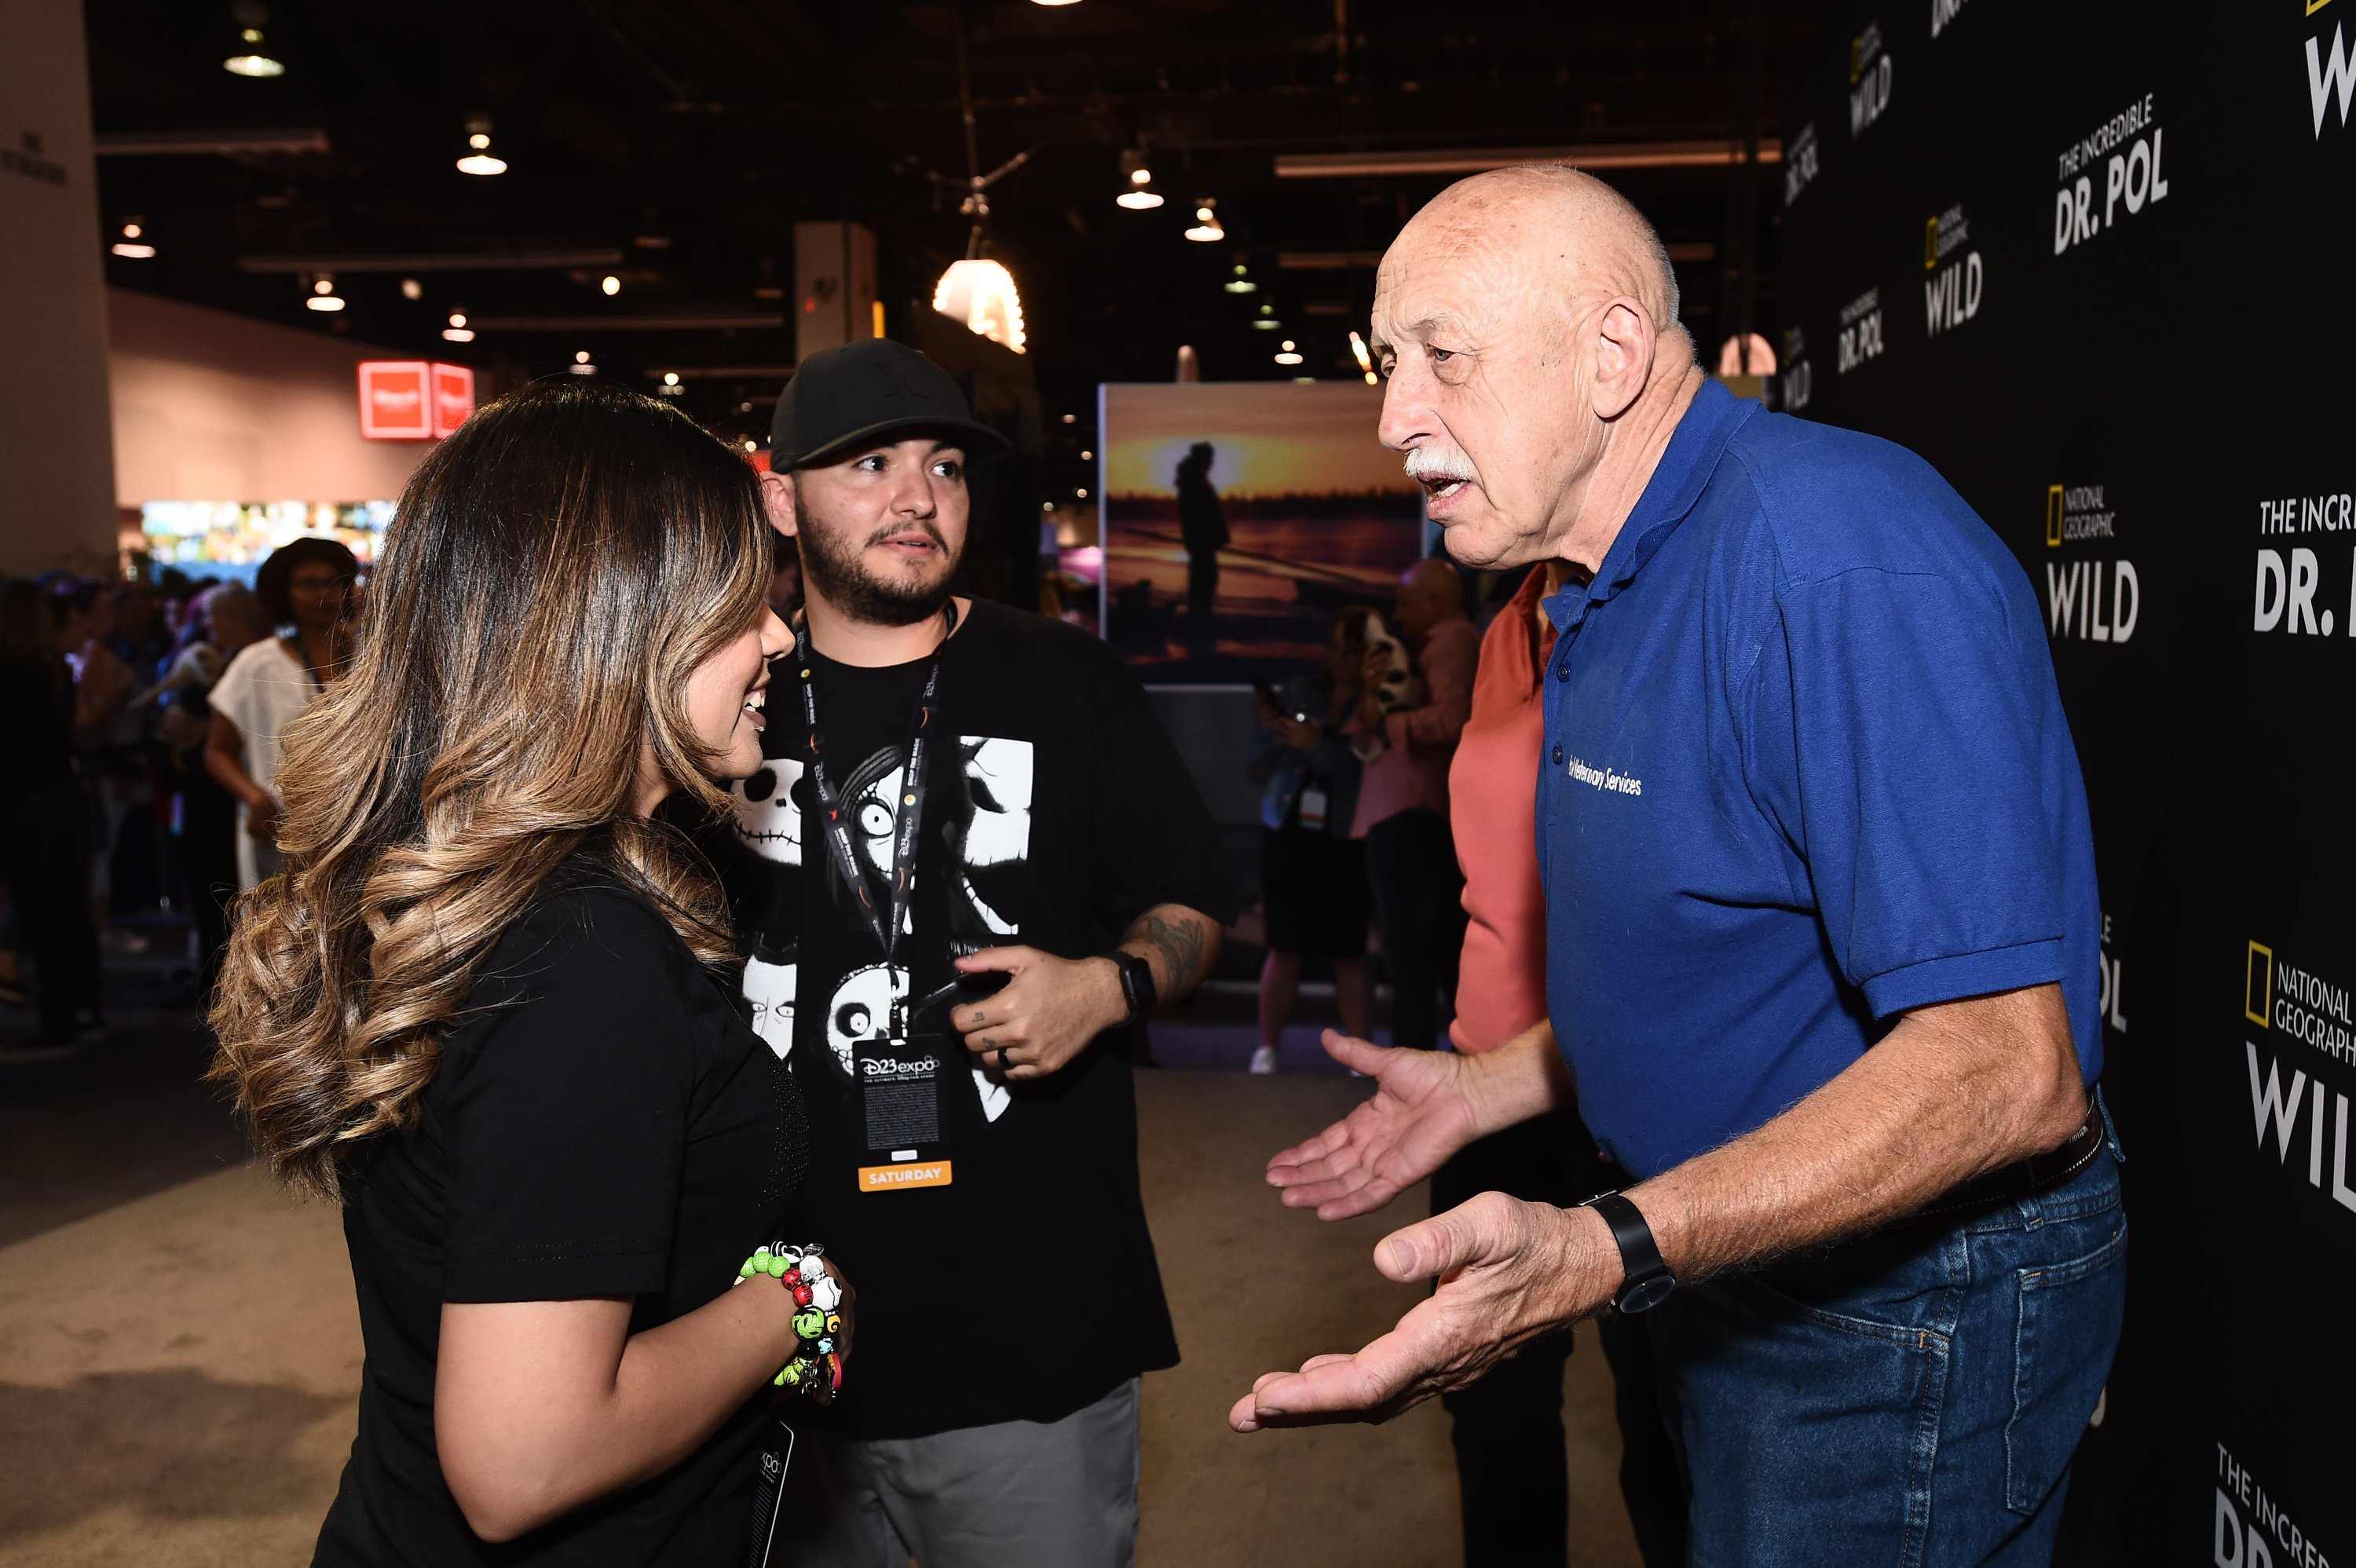 Dr. Jan Pol, right, of 'The Incredible Dr. Pol' greets fans in 2019.